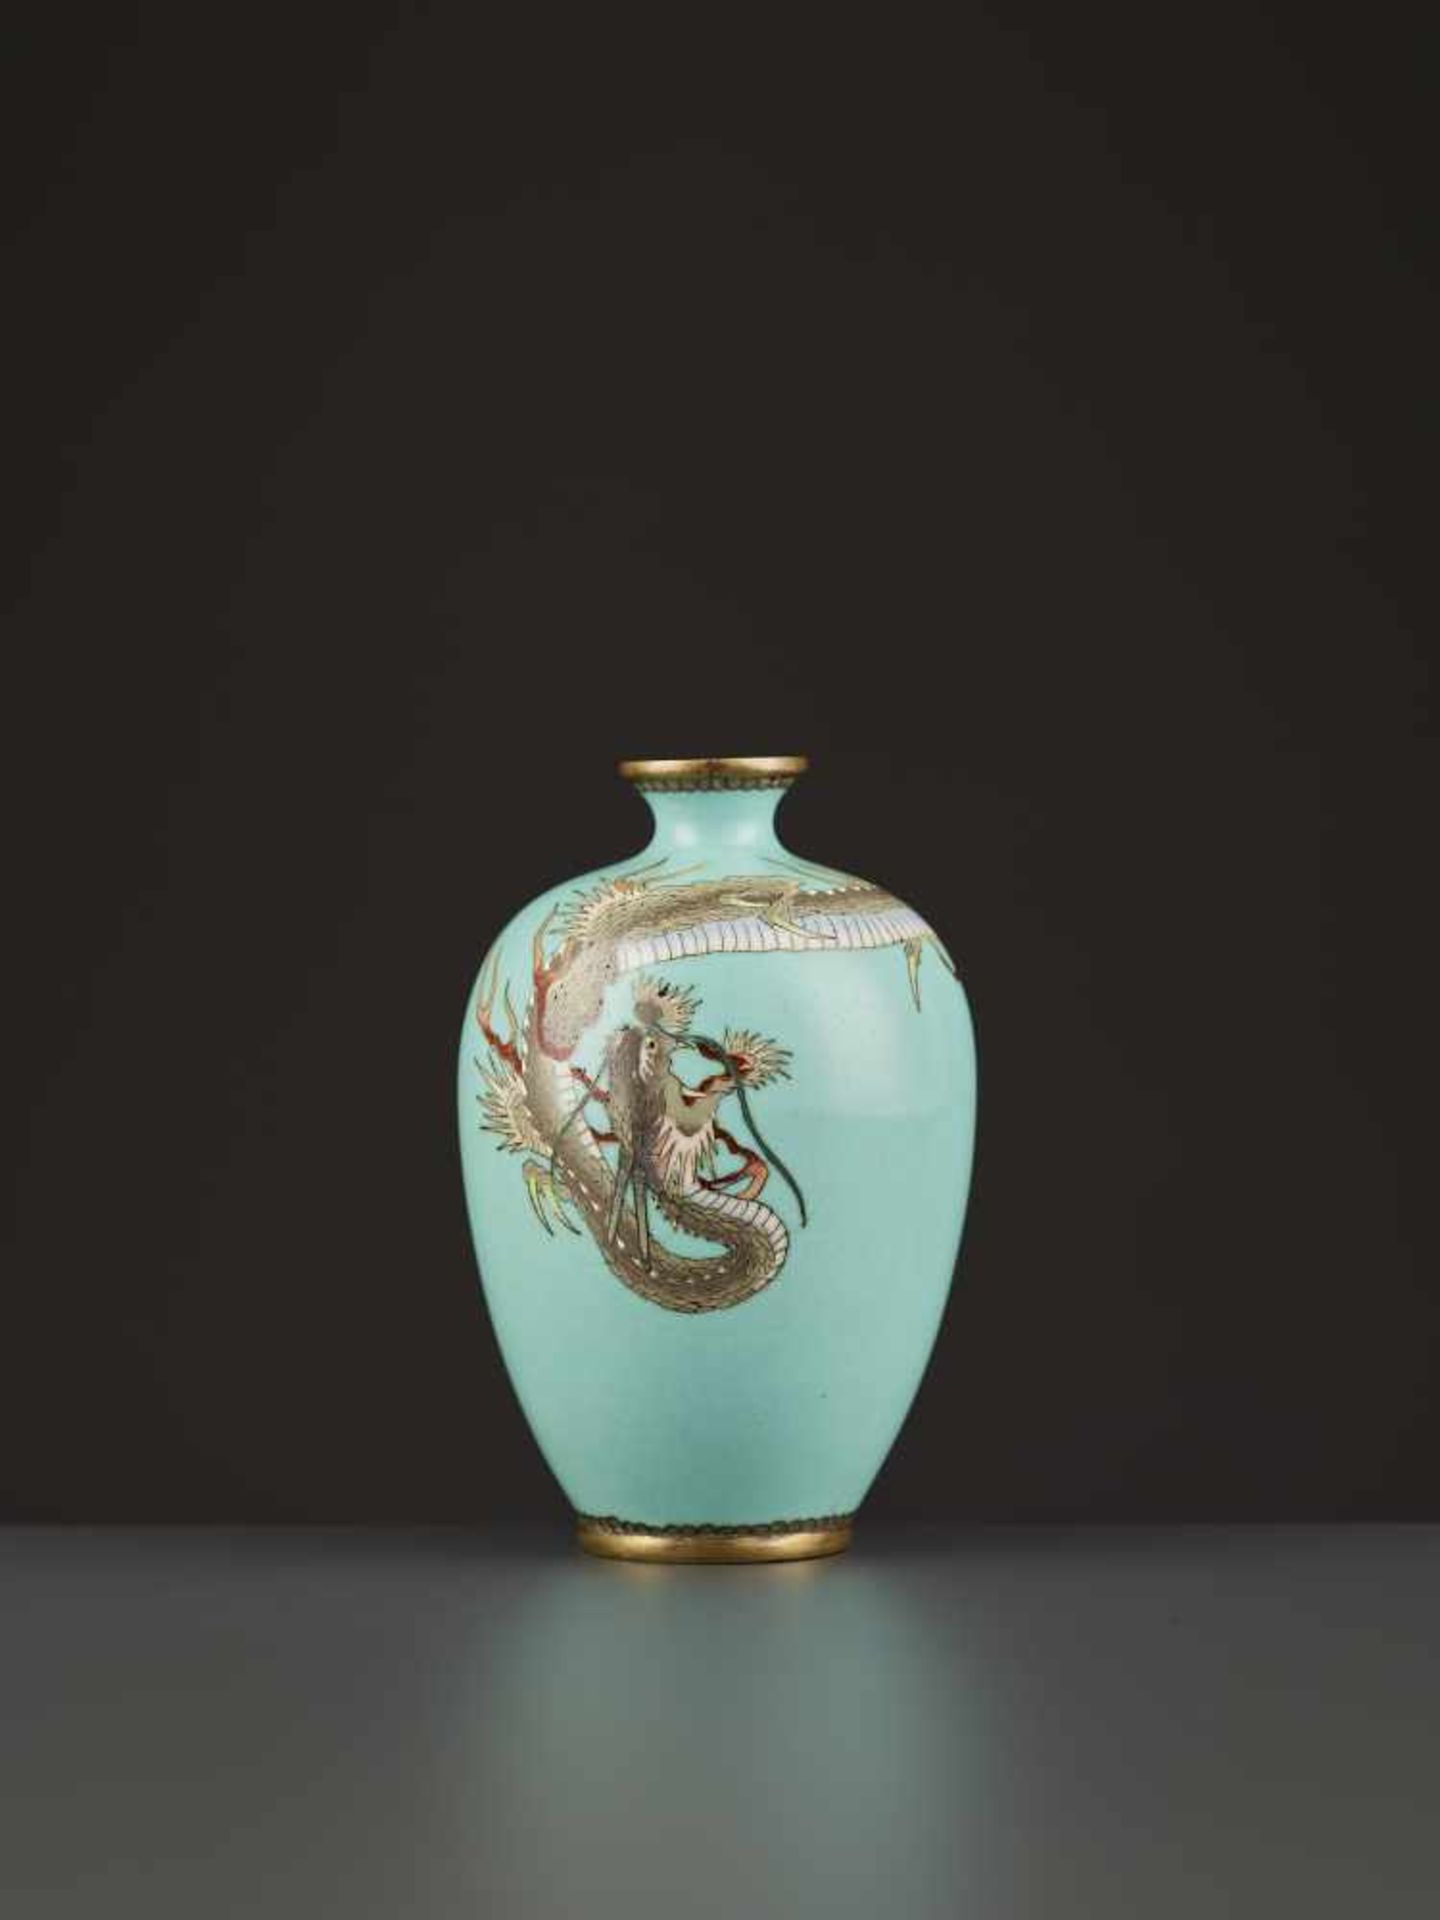 A SMALL DRAGON CLOISONNÉ VASE Japan, Meiji period (1868-1912). Finely enameled to depict a sinuous - Image 2 of 7